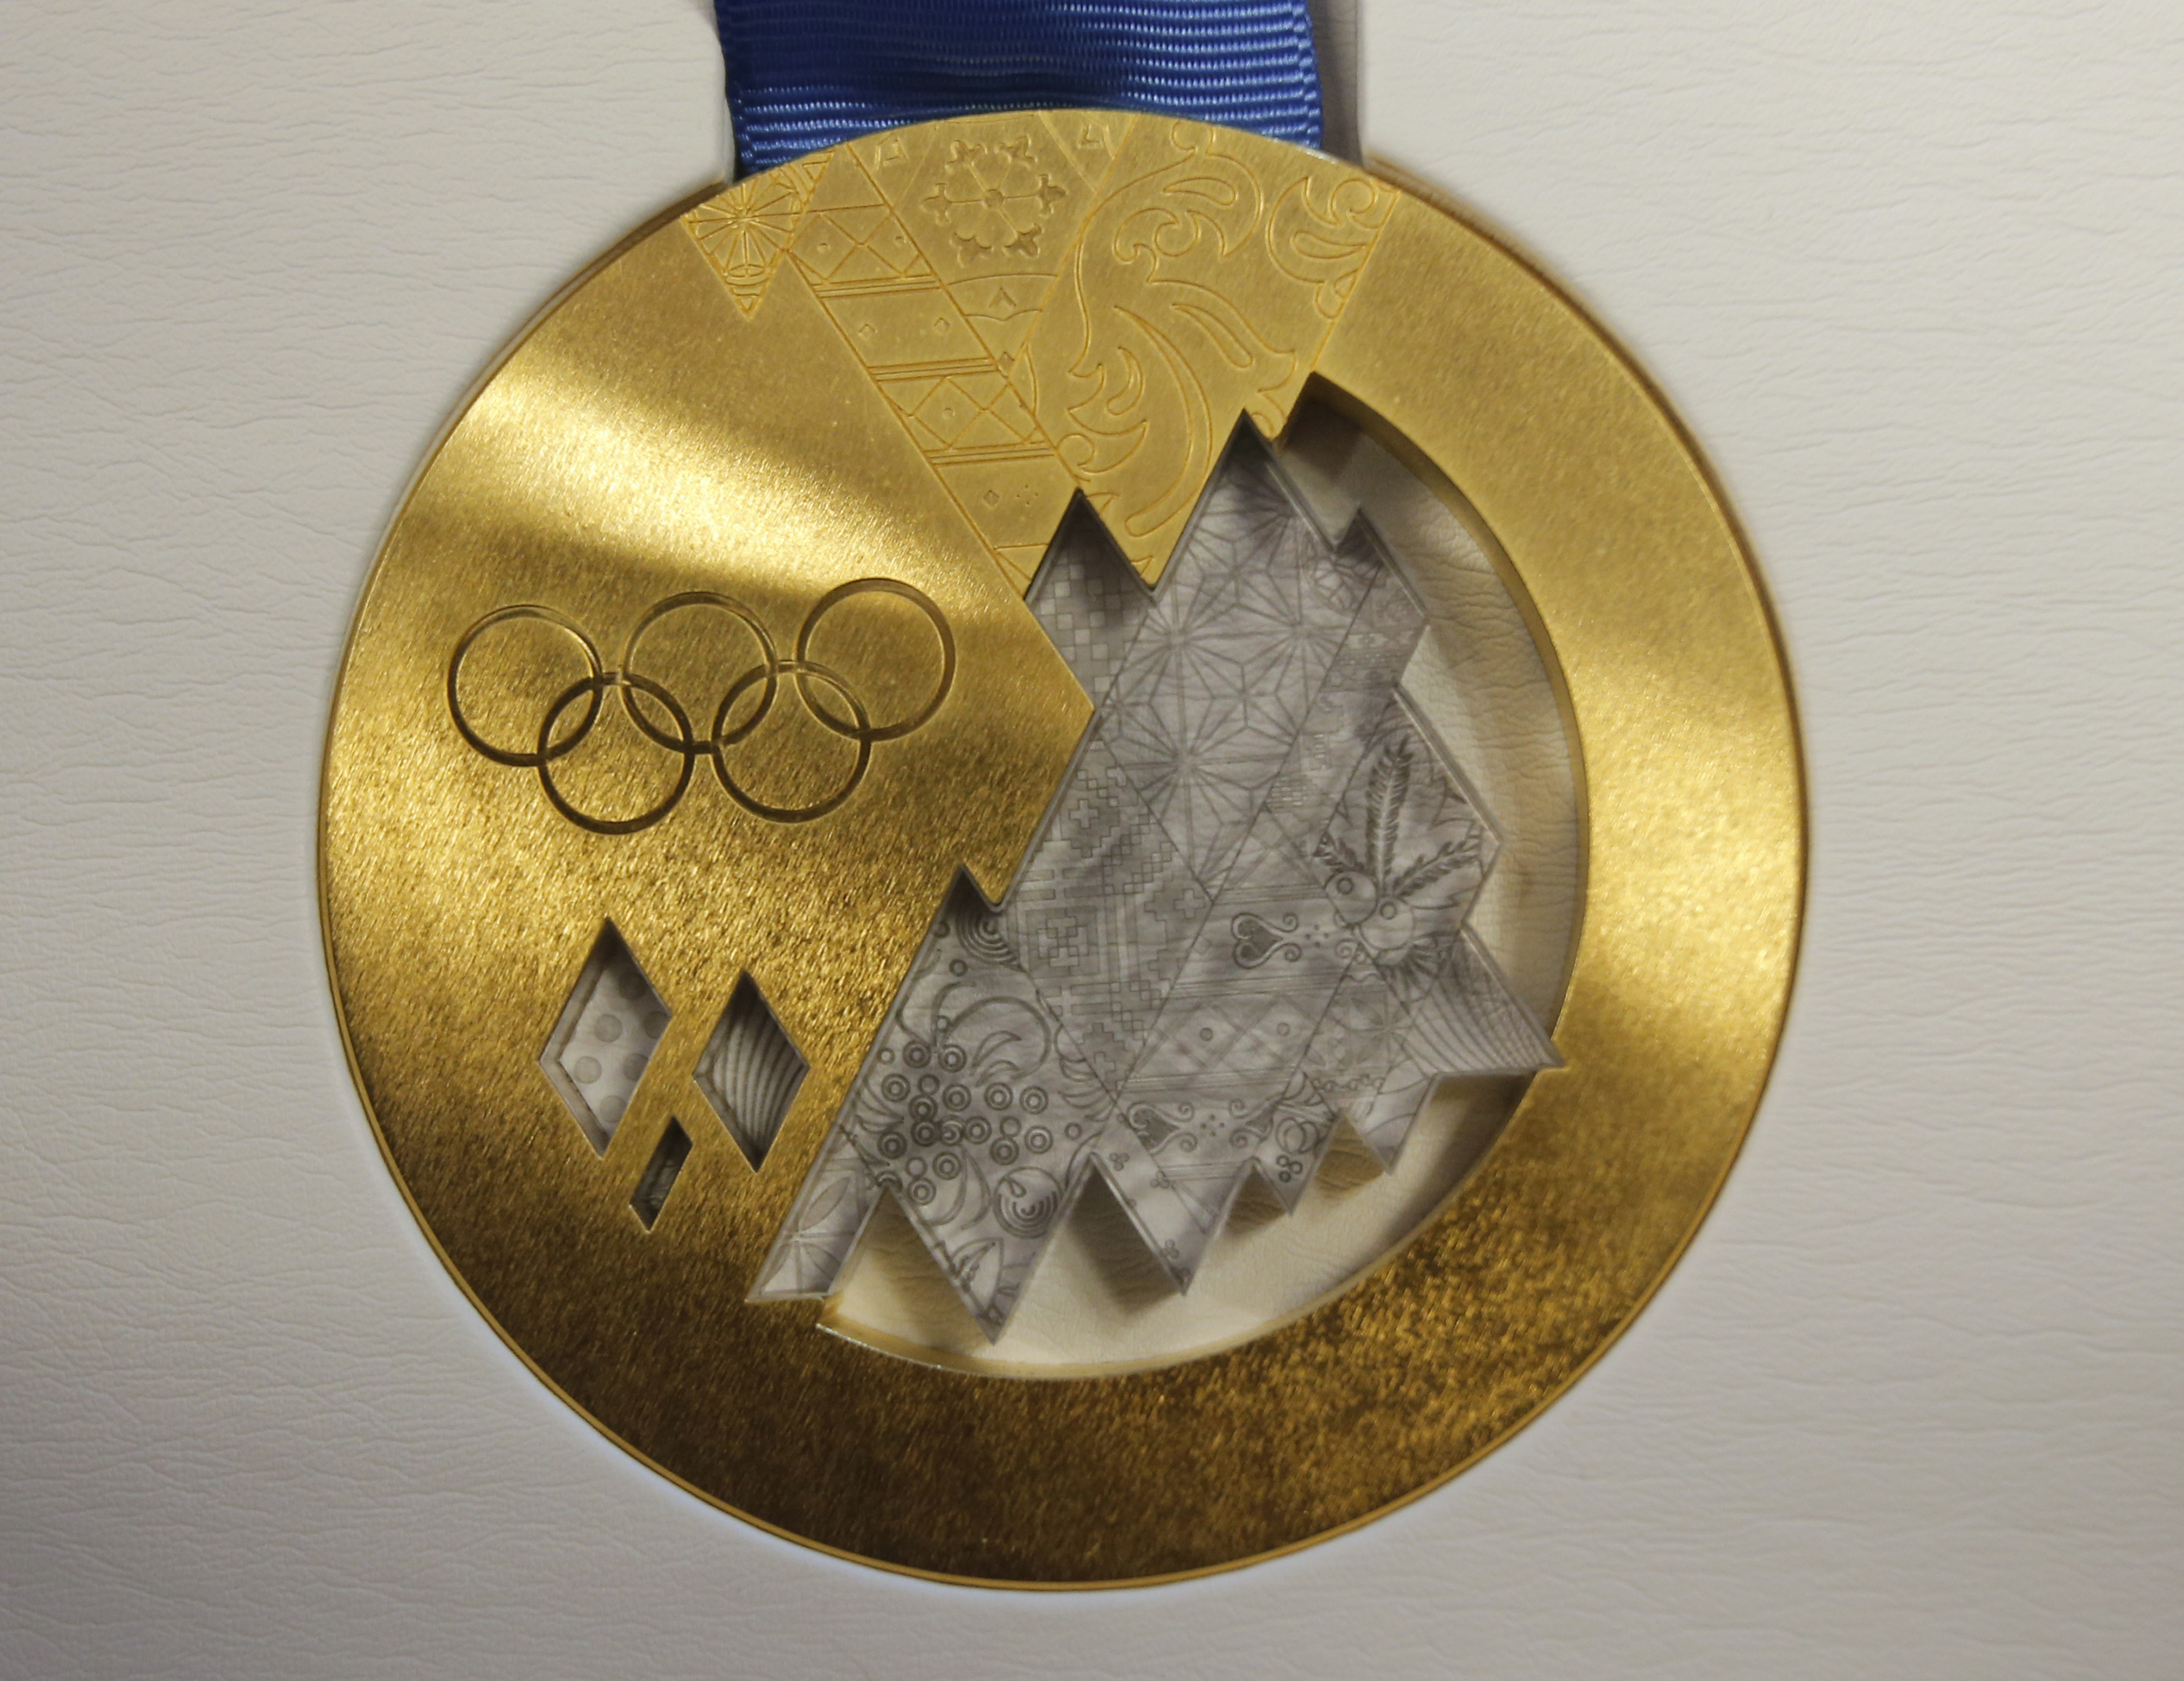 Olympic gold medal in Sochi in 2014 wallpaper and image, picture, photo